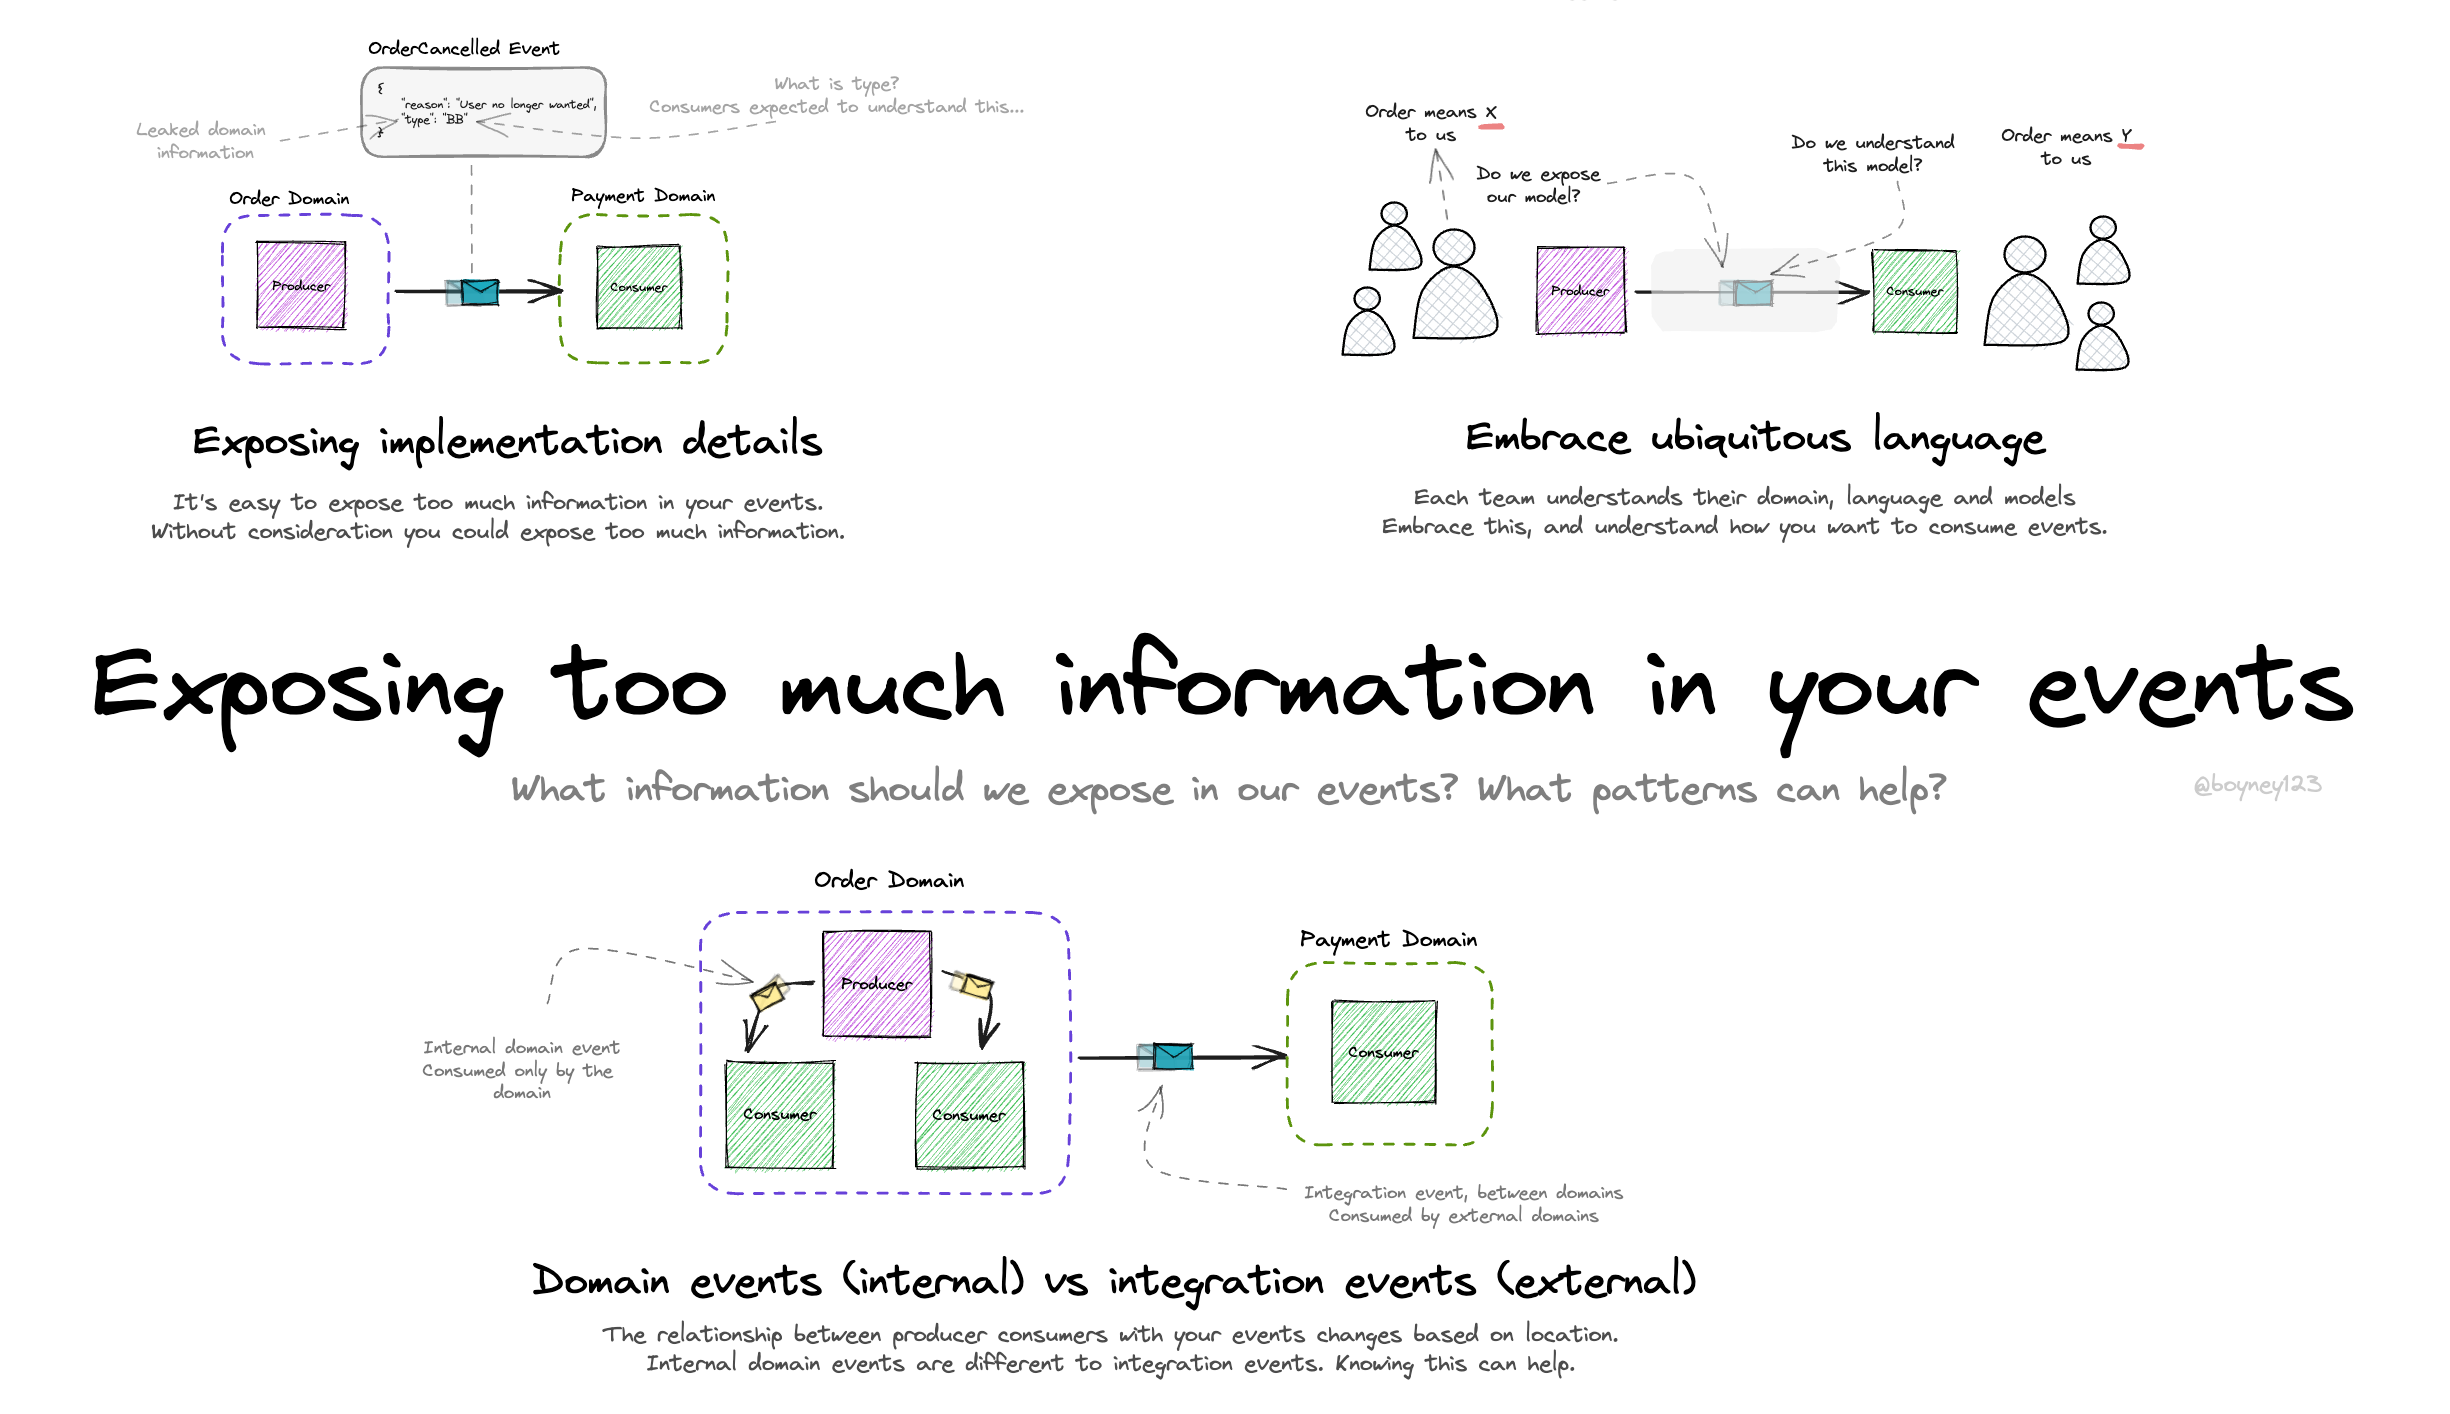 Exposing too much information in your events